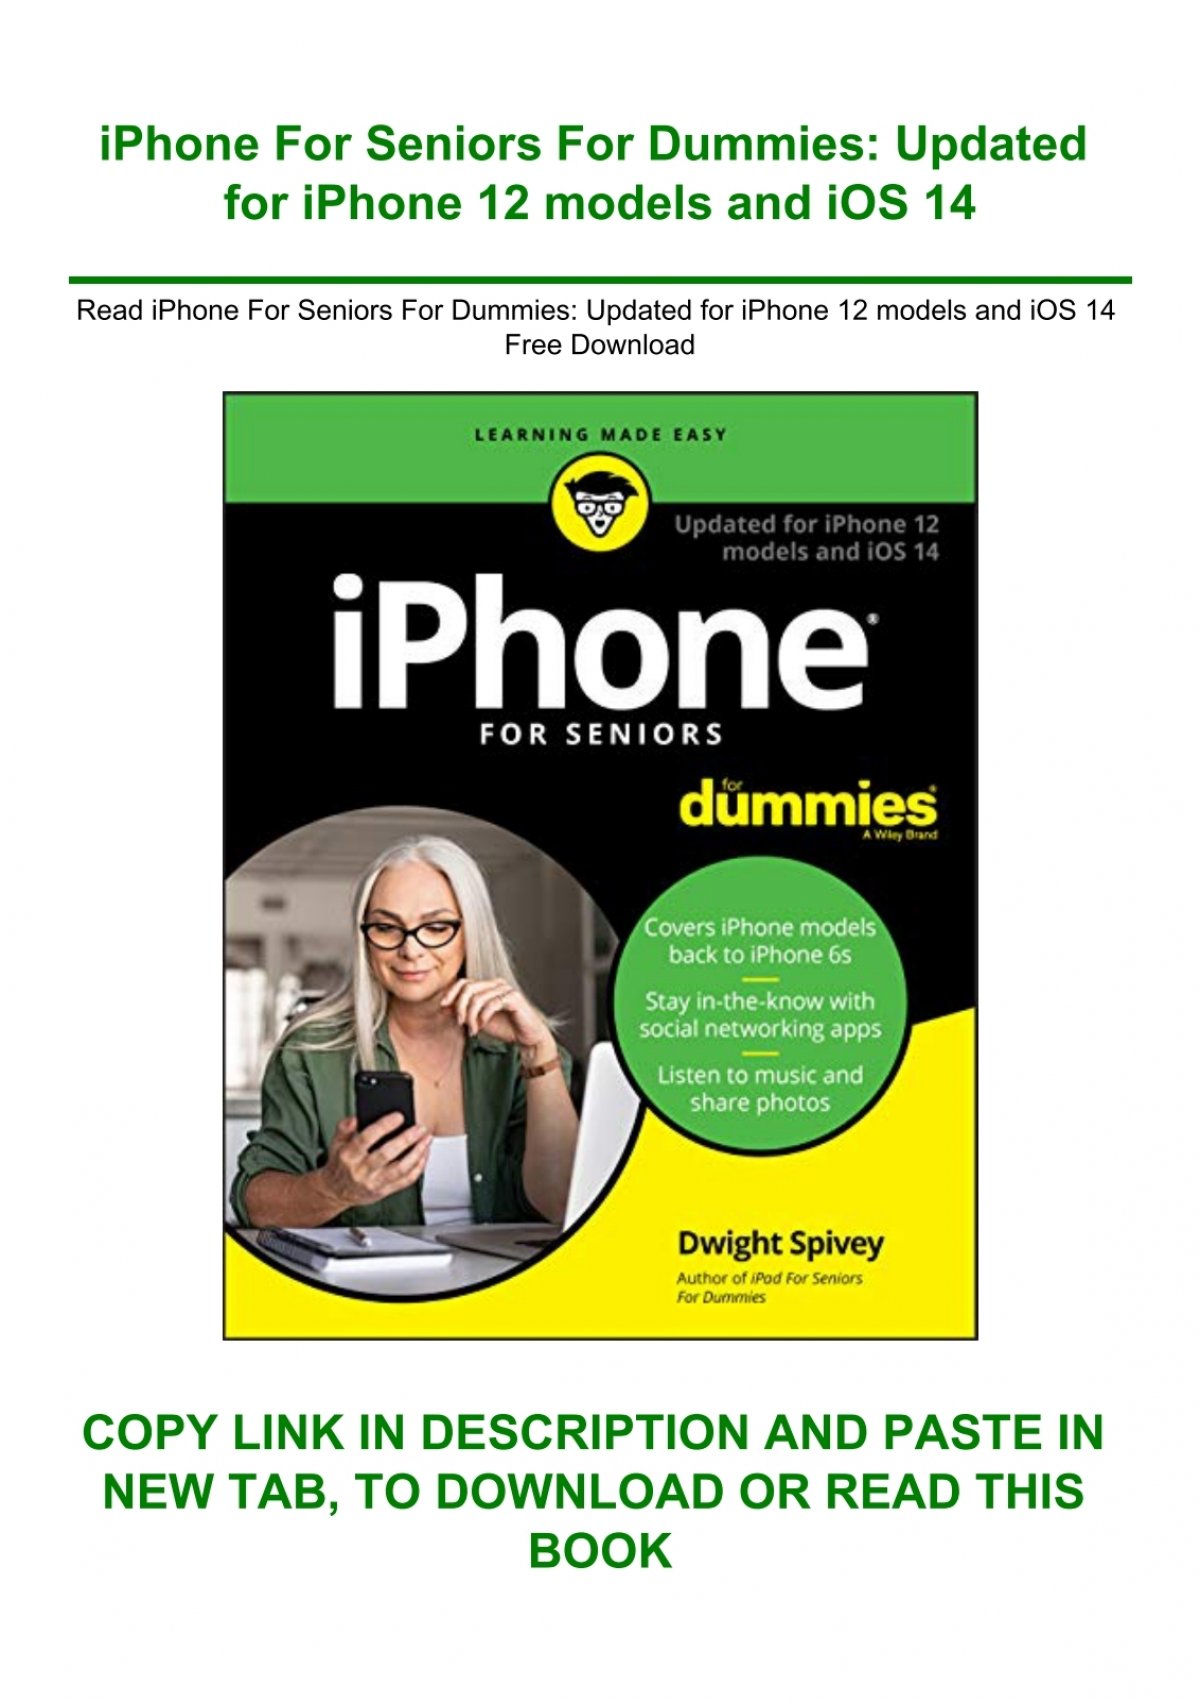 Read iPhone For Seniors For Dummies Updated for iPhone 12 models and ...